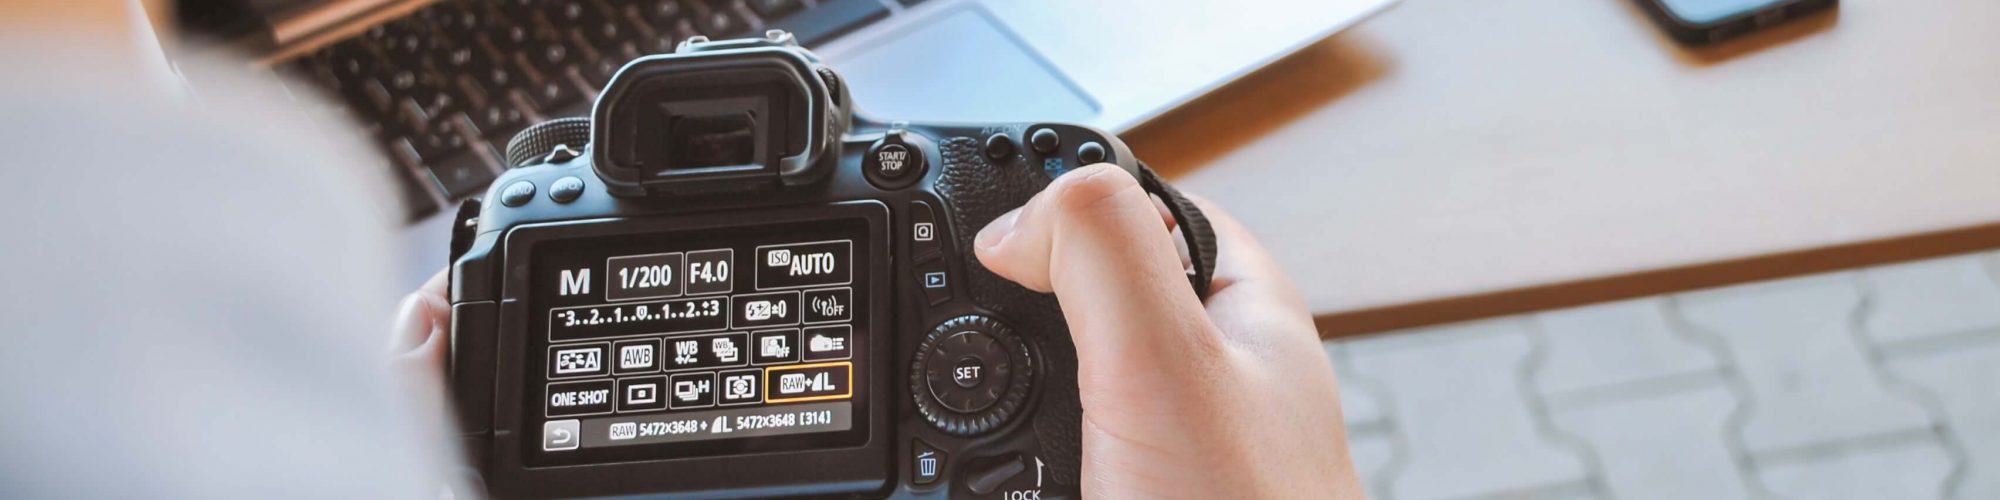 12 best sites to find freelance photography jobs